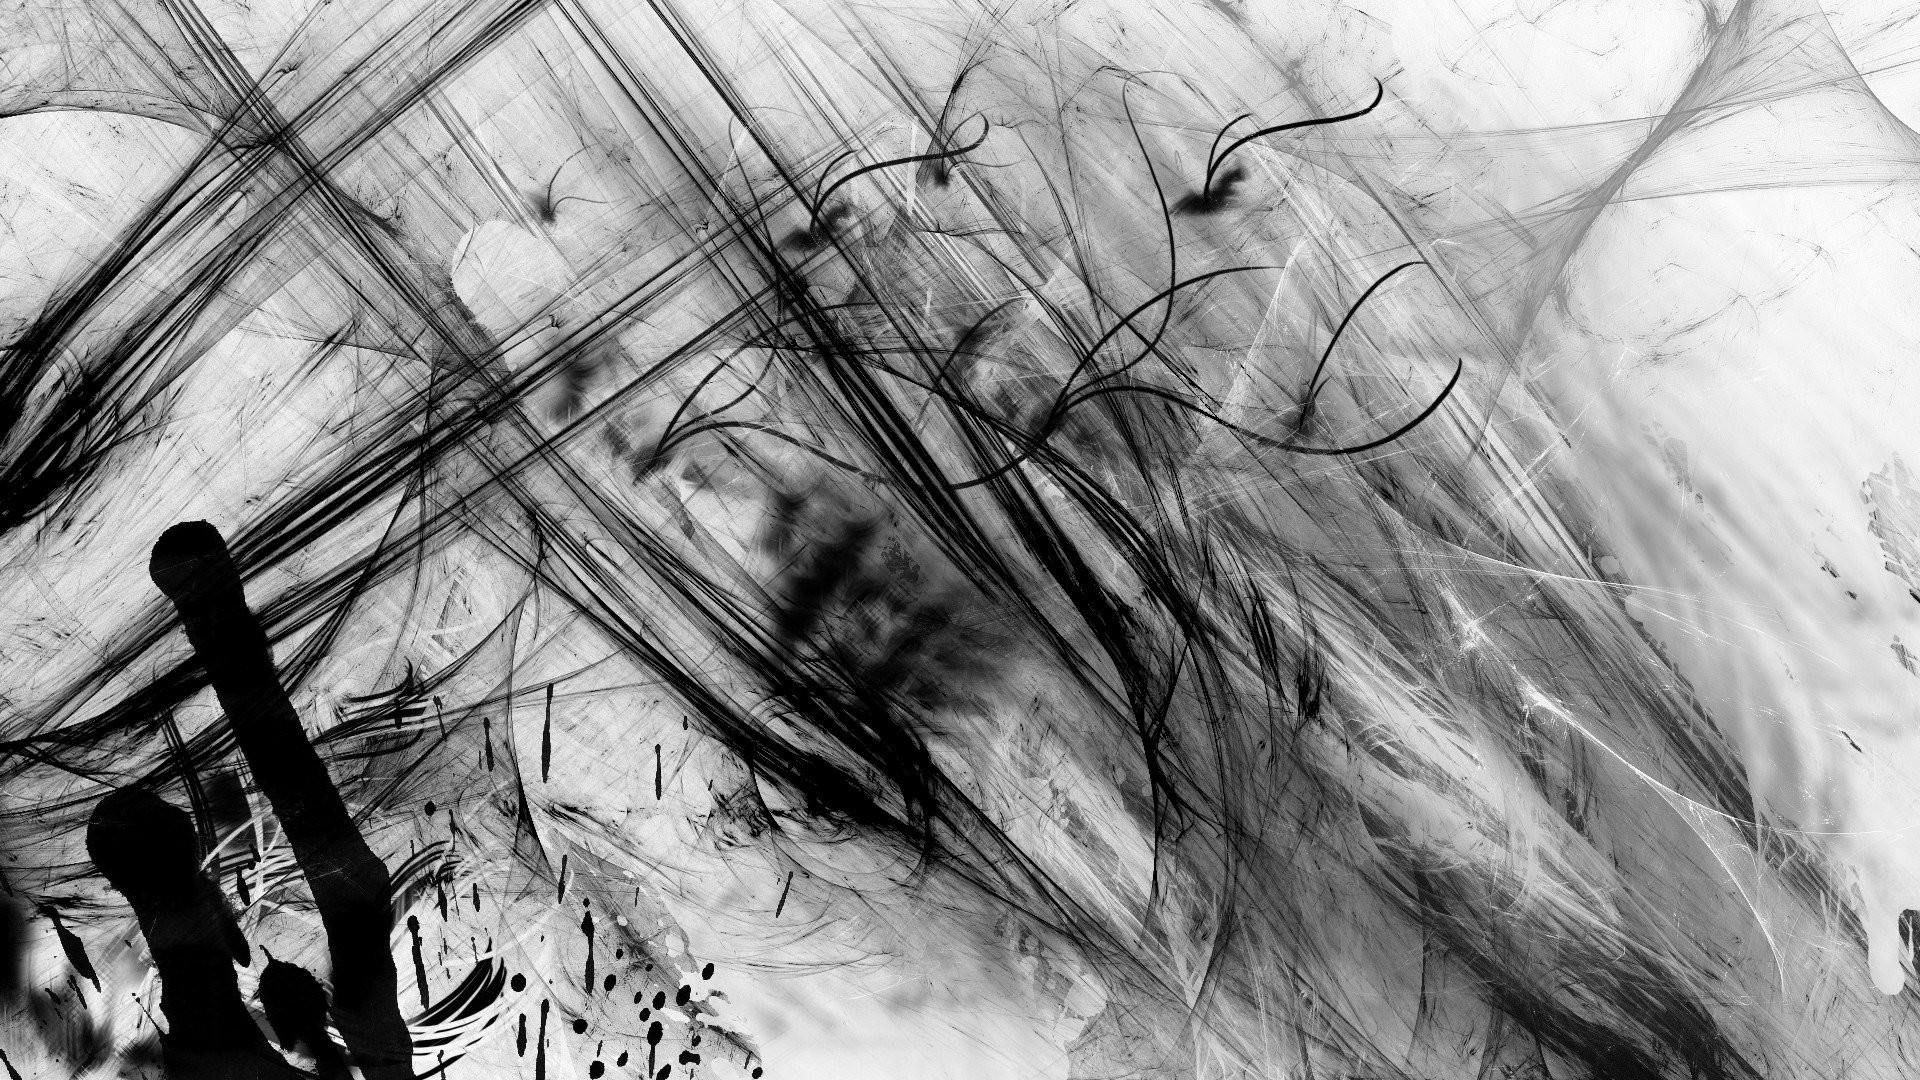 1920x1080 HD Abstracts . UPLOAD. TAGS: Spray Paint Contrast Abstract White  Black